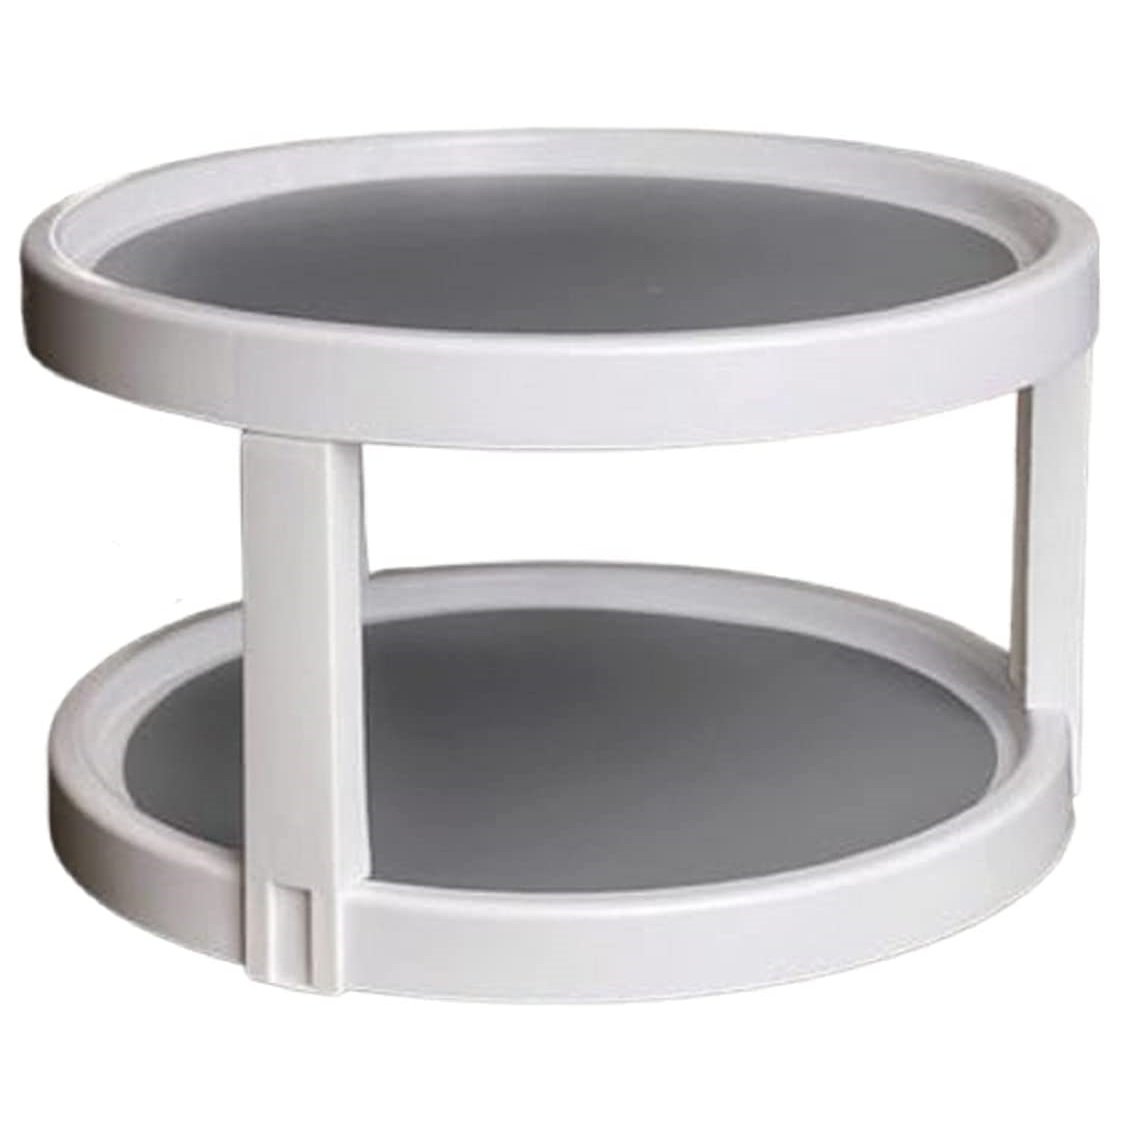 2 Tier Lazy Susan Turntable Cabinet Organizer Pantry Plastic Spice